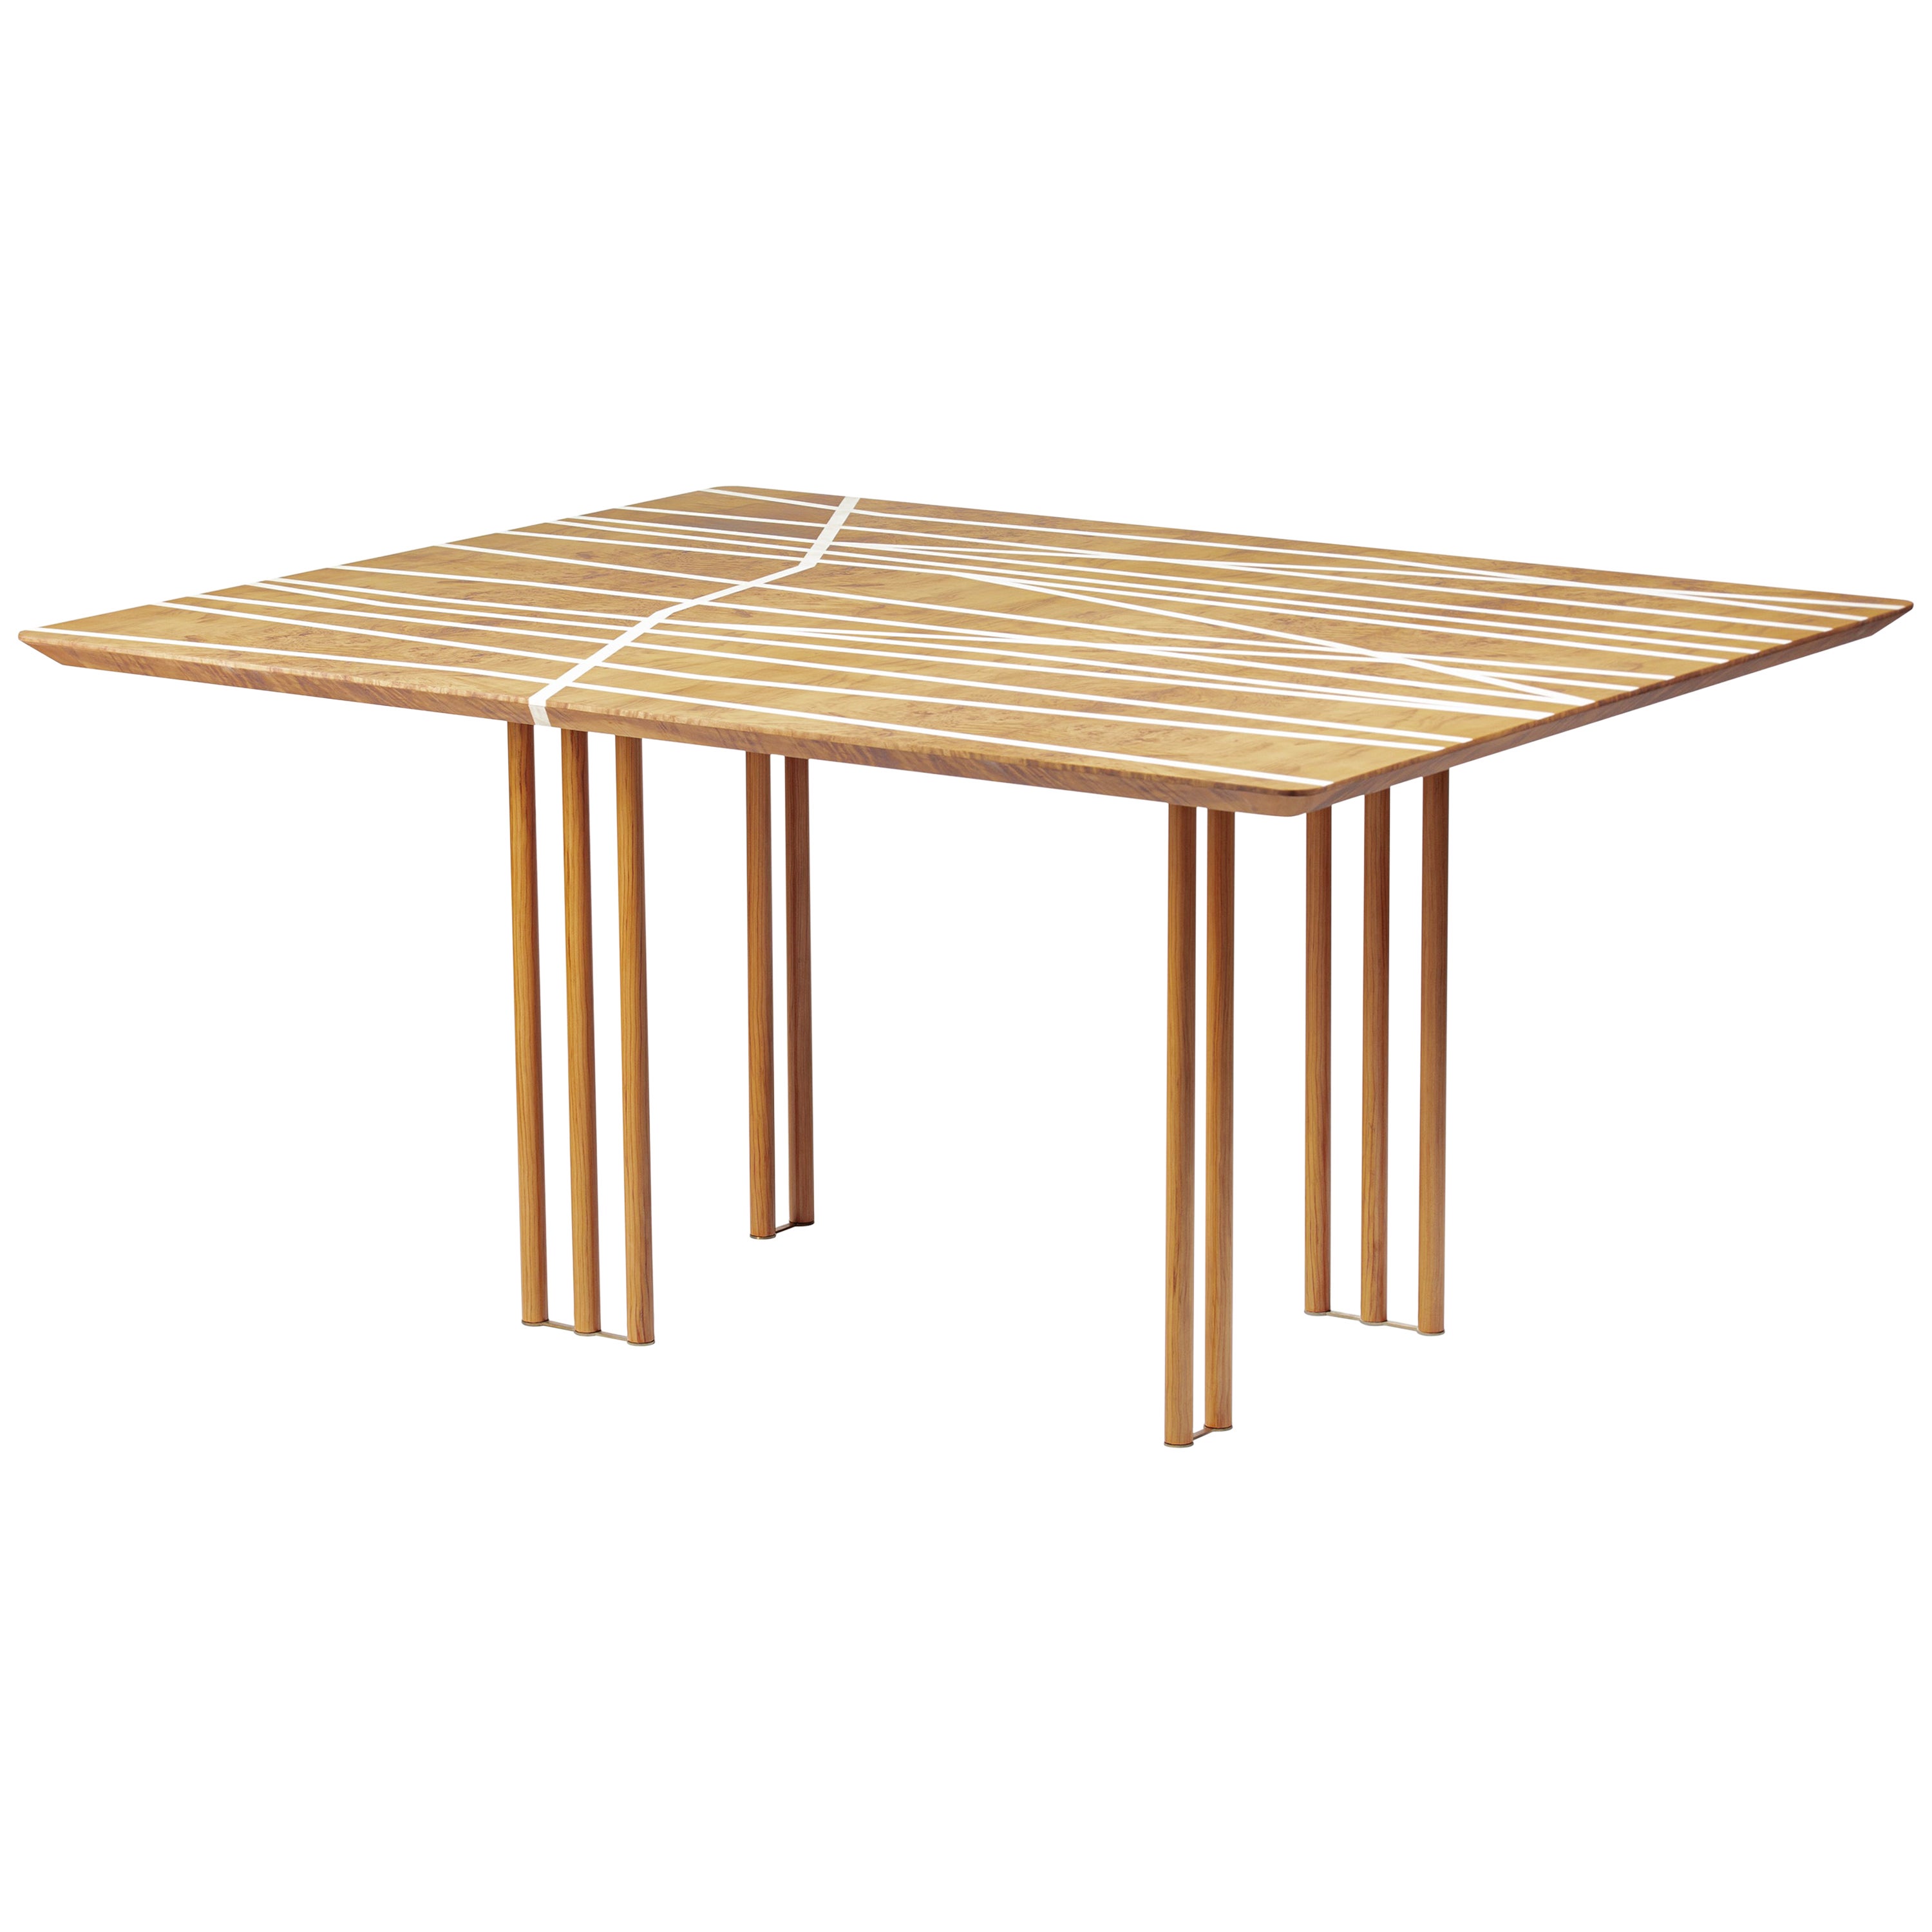 21st Century Foresta Table, Myrtle Burl, White Maple, Cedar Legs, Made in Italy For Sale